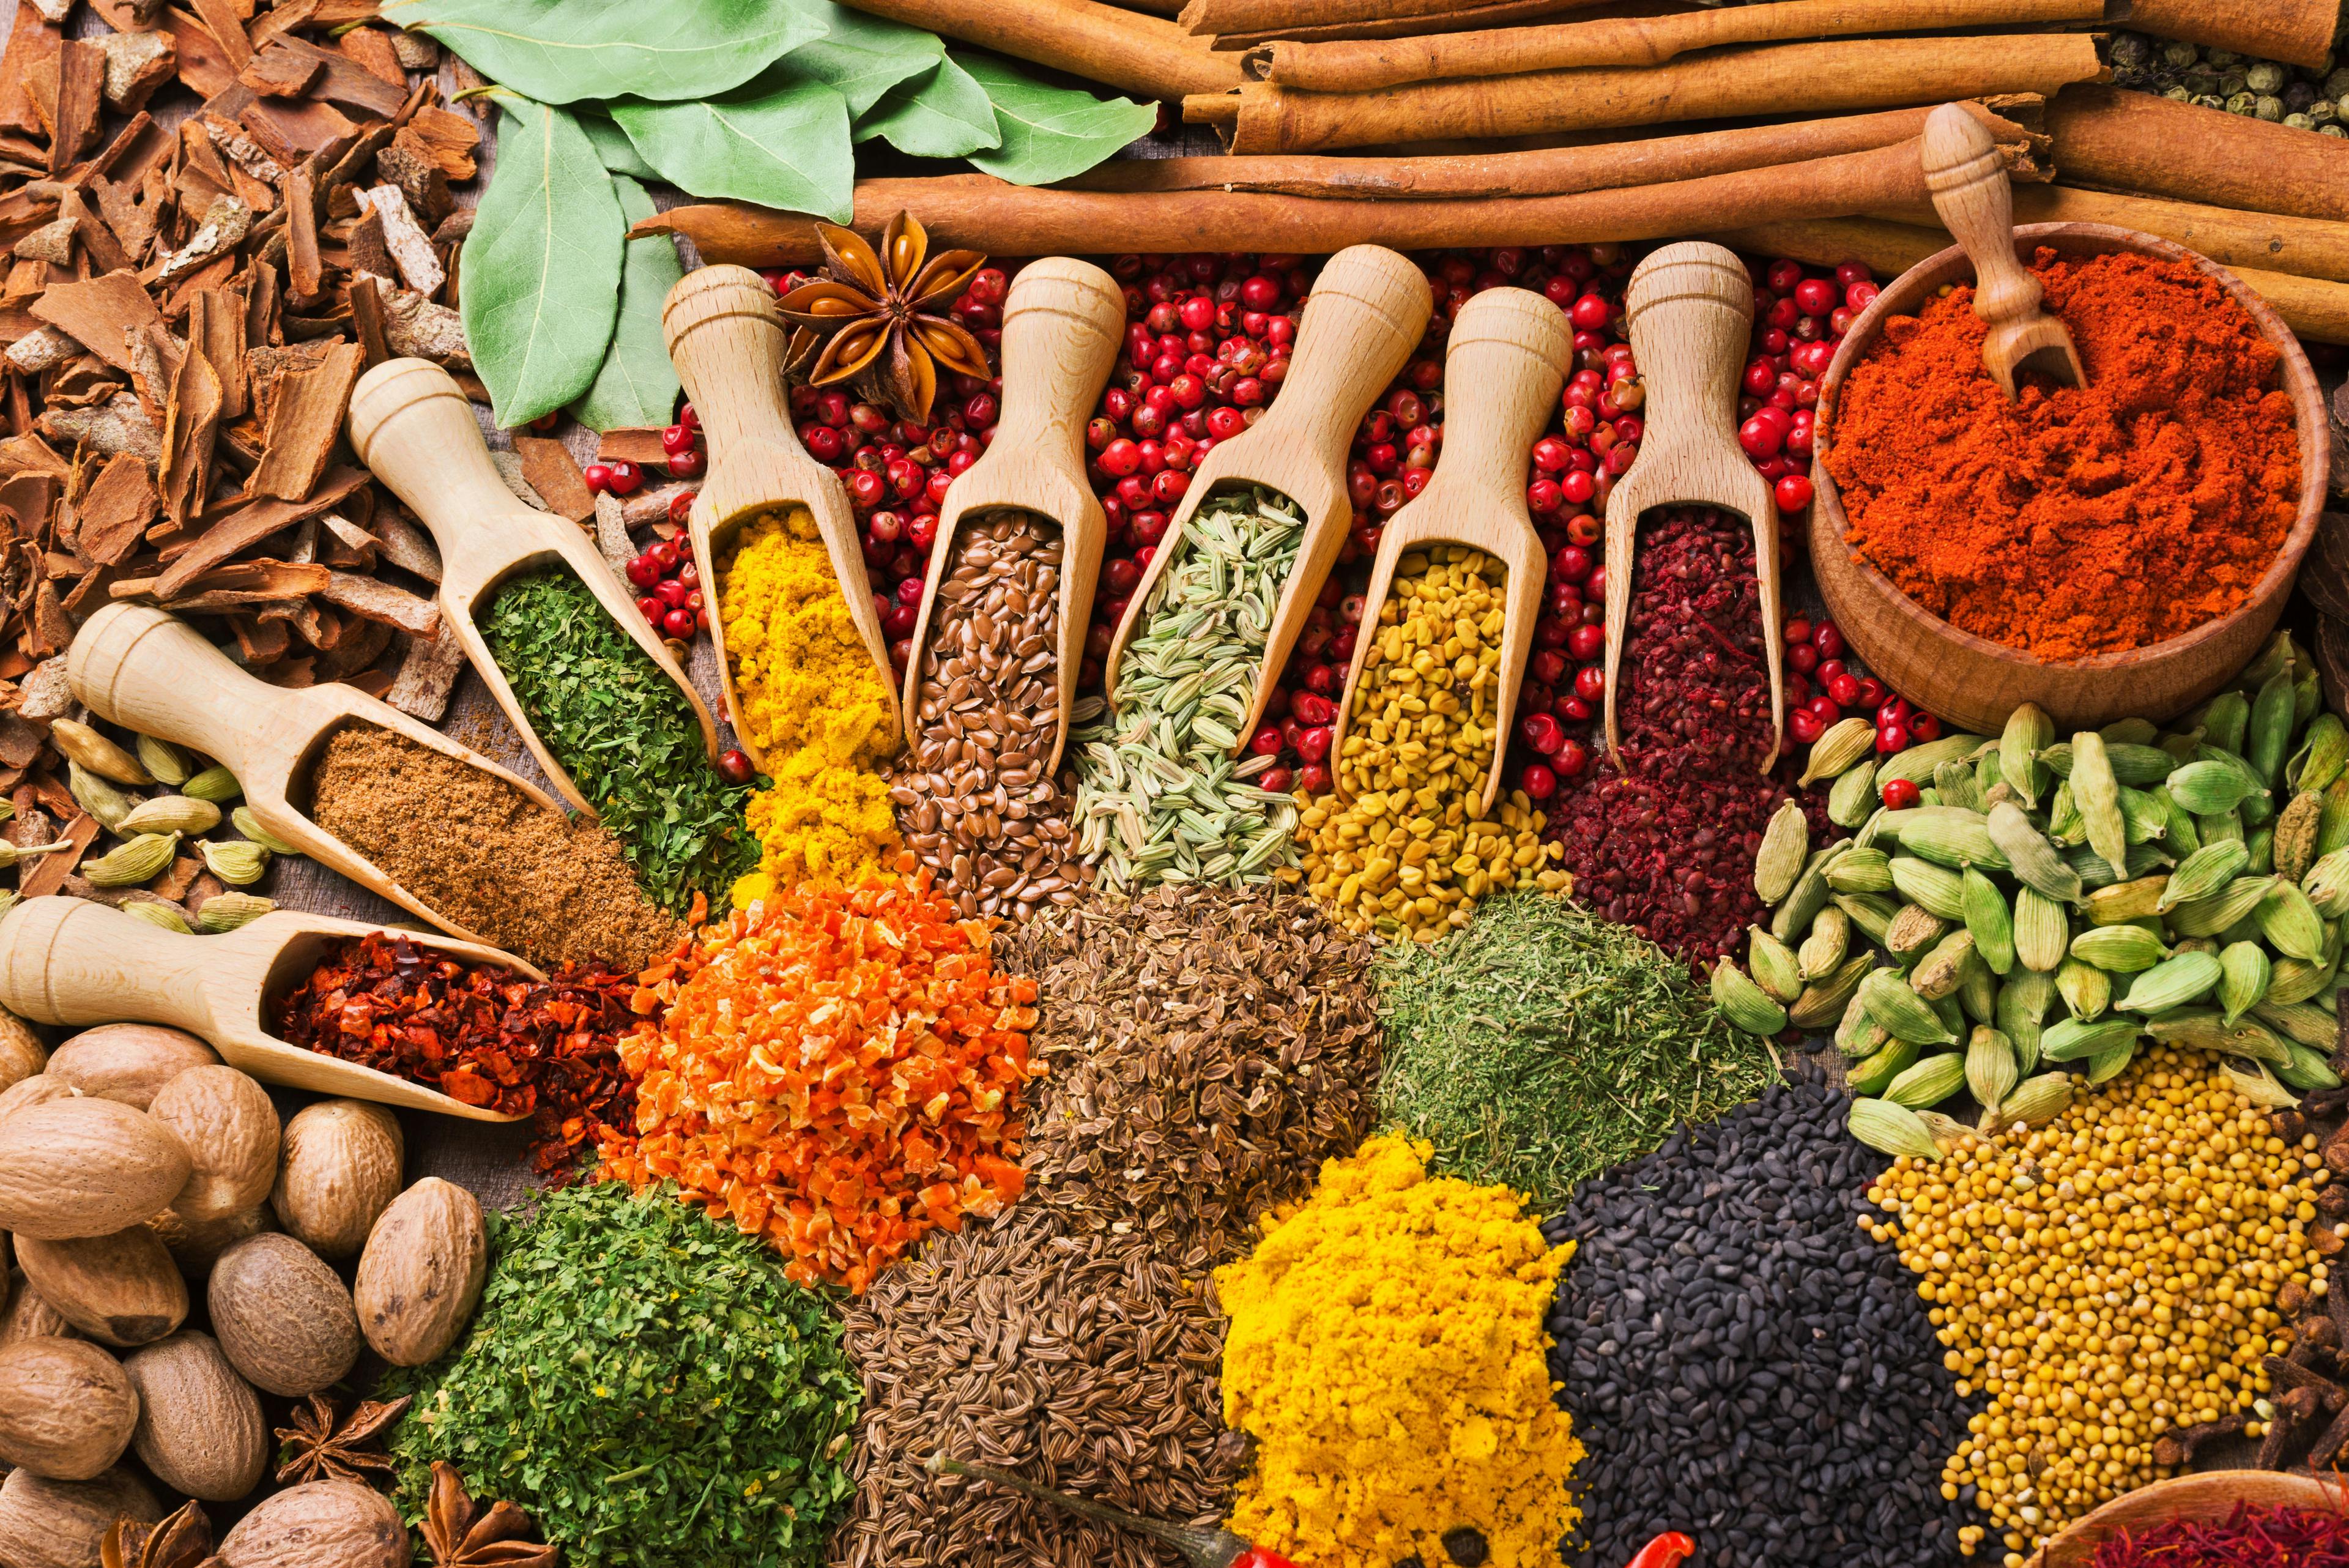 composition with different spices and herbs | Image Credit: © andriigorulko - stock.adobe.com.